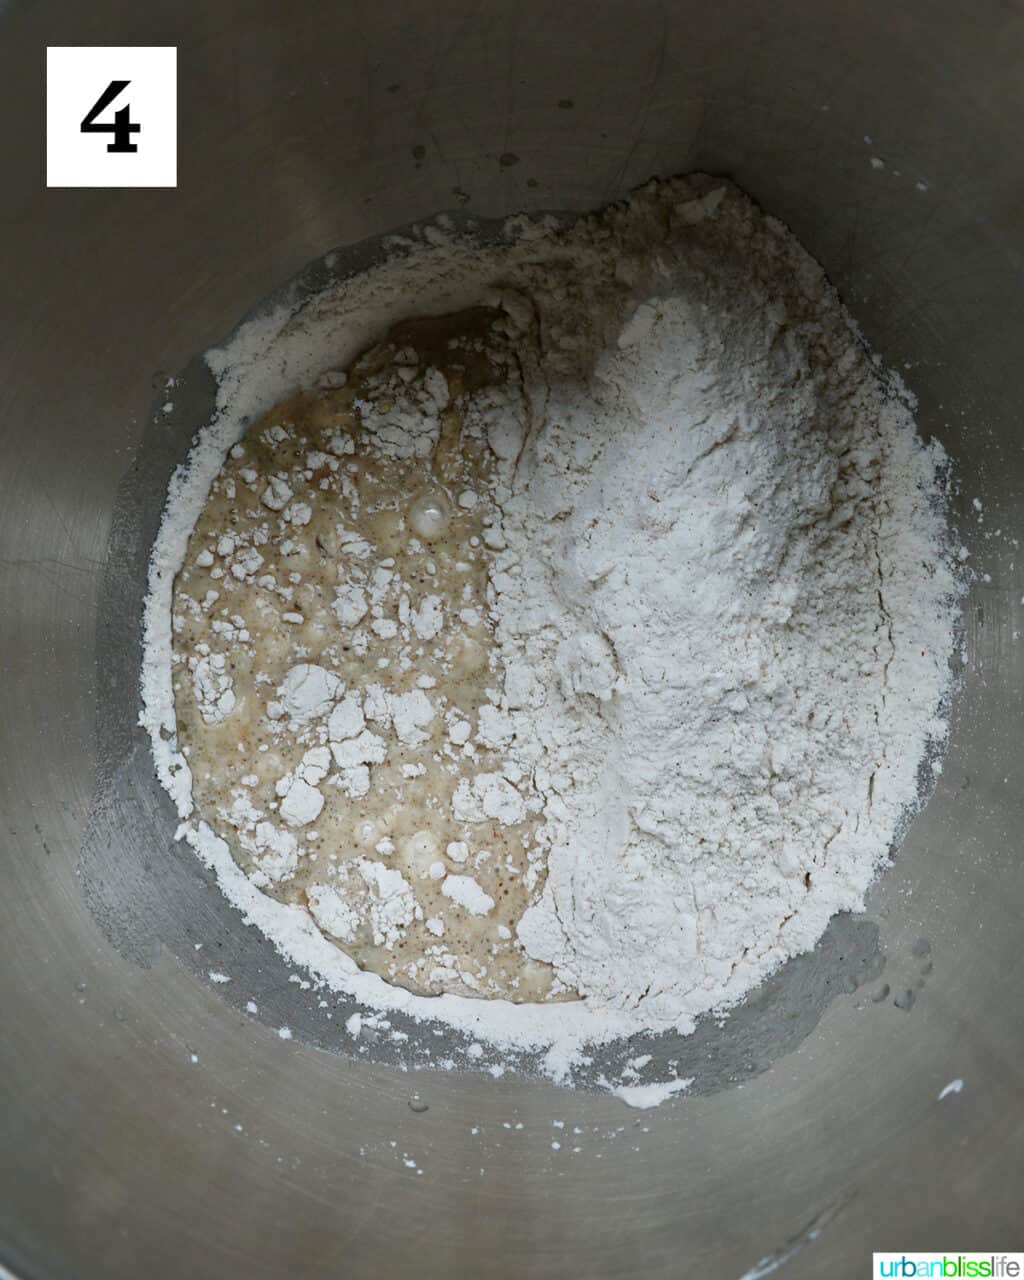 dry flour ingredients added to wet batter ingredients.